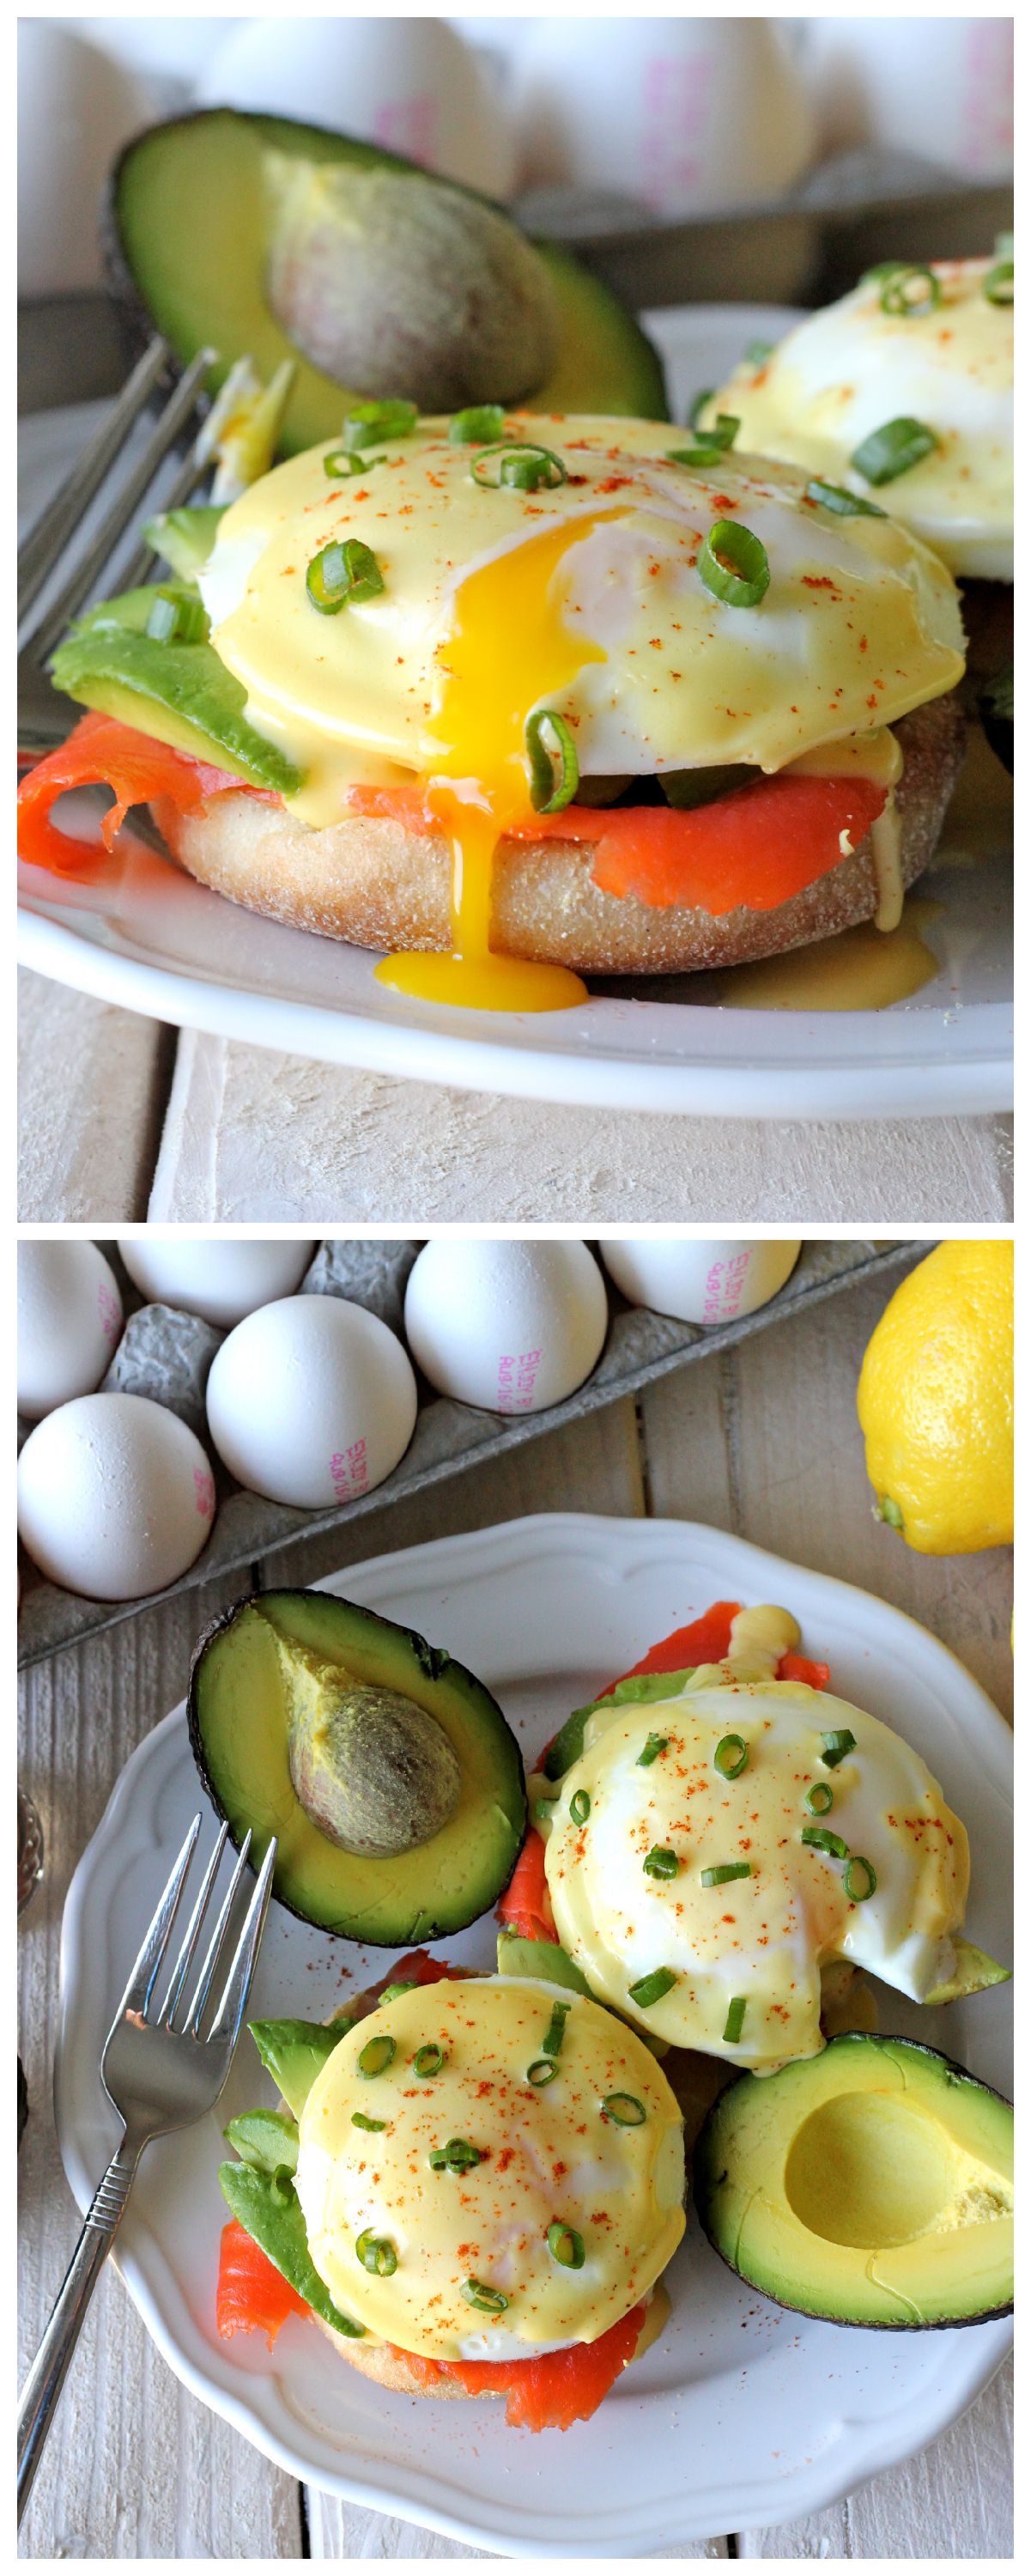 Smoked Salmon Eggs Benedict – No need to overpay for restaurant eggs benedict anymore. This homemade version is easy, tastier, and